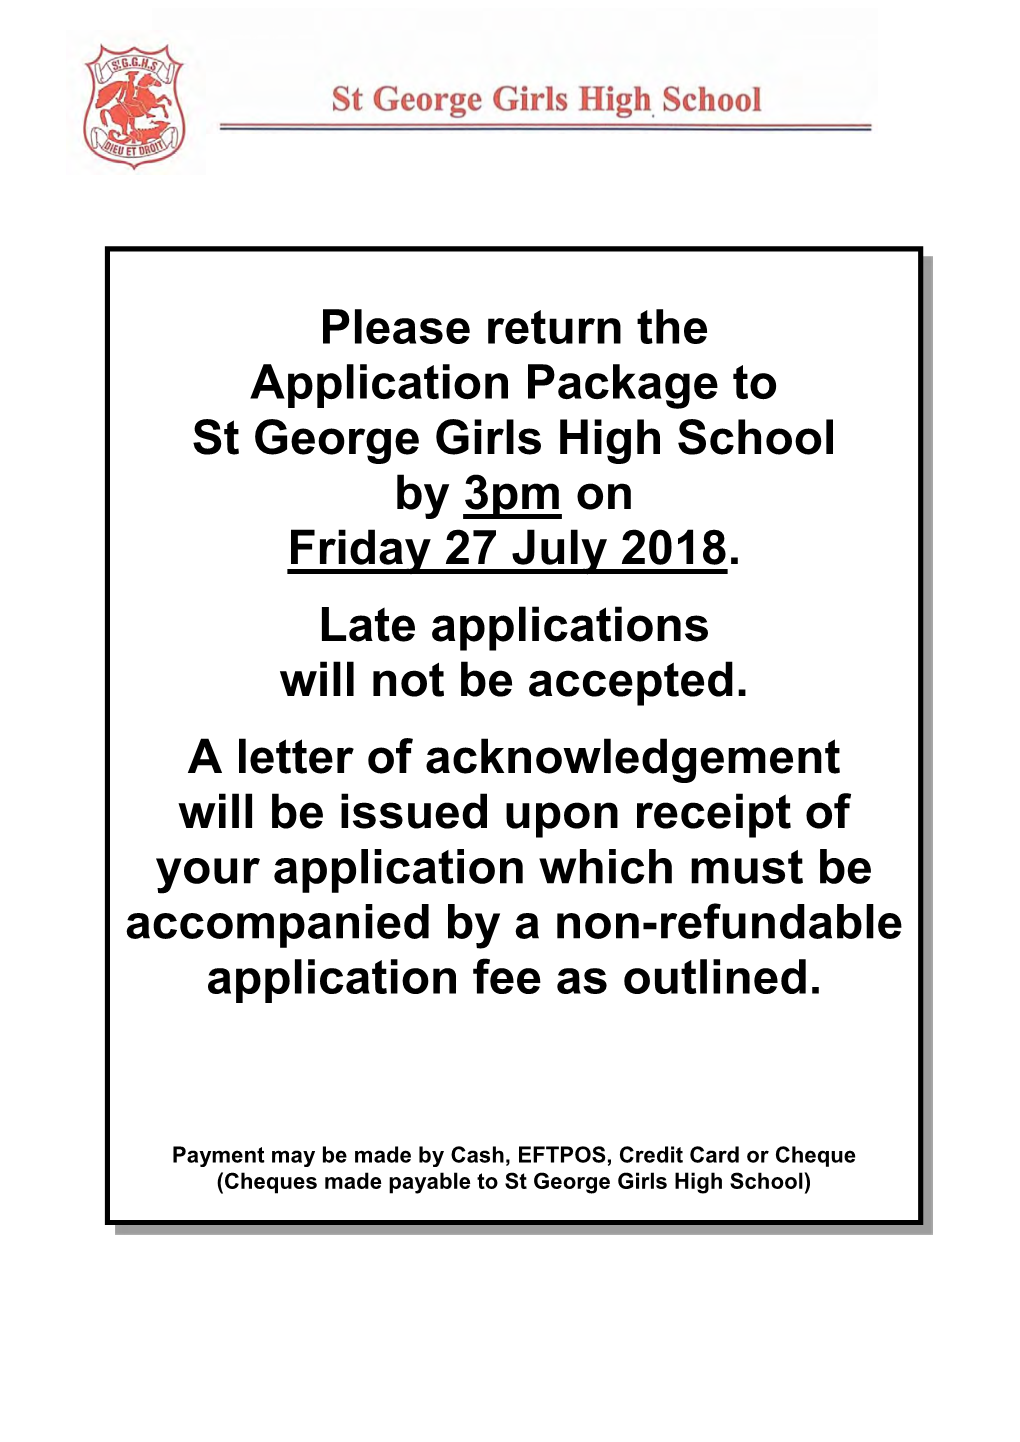 Please Return the Application Package to St George Girls High School by 3Pm on Friday 27 July 2018